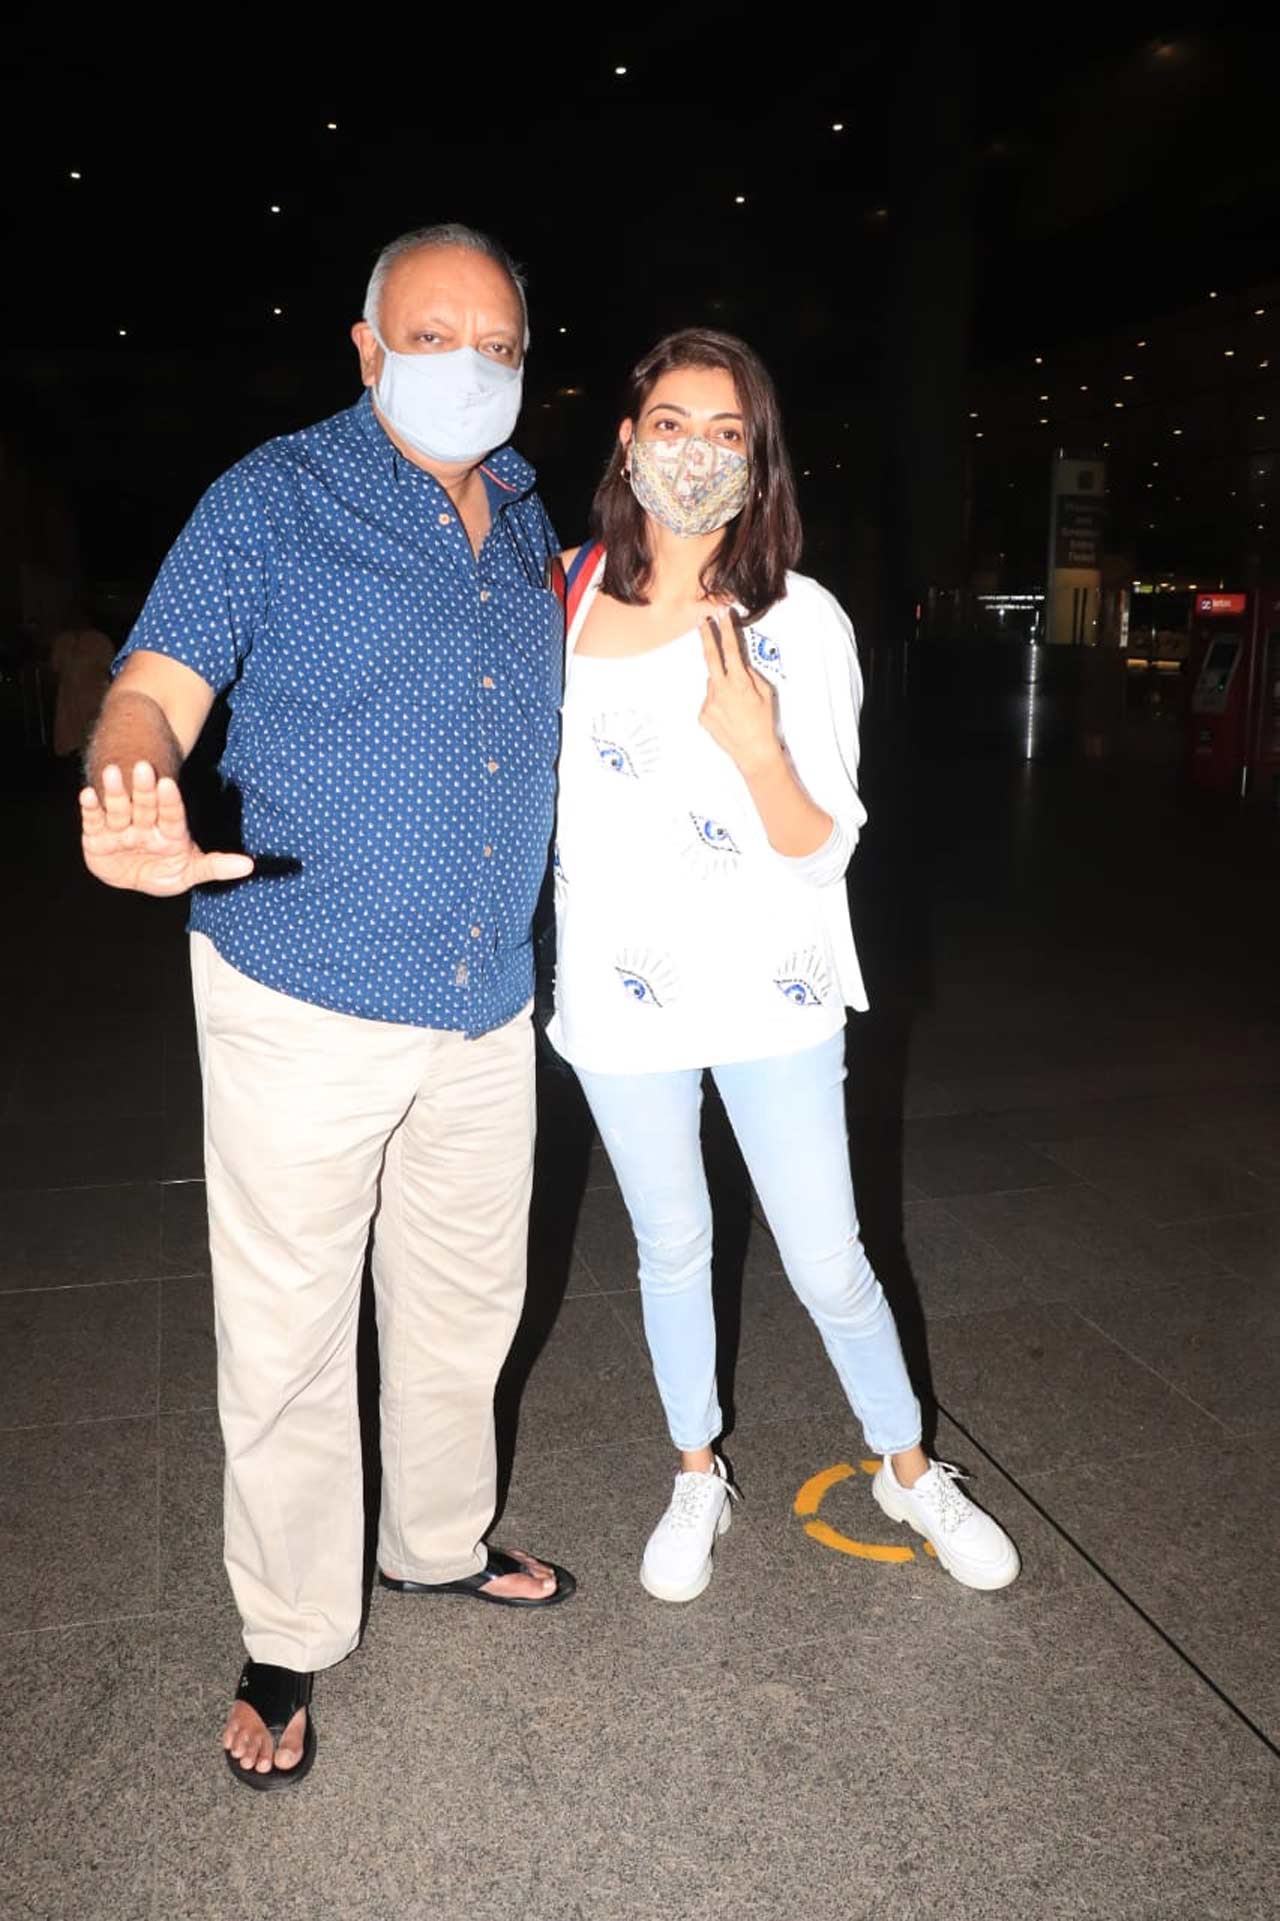 Kajal Aggarwal posed with her dad, who accompanied her at the Mumbai airport. On the work front, the actress has a series of movie releases - Ghosty, Acharya, Indian 2, Paris Paris, among others.